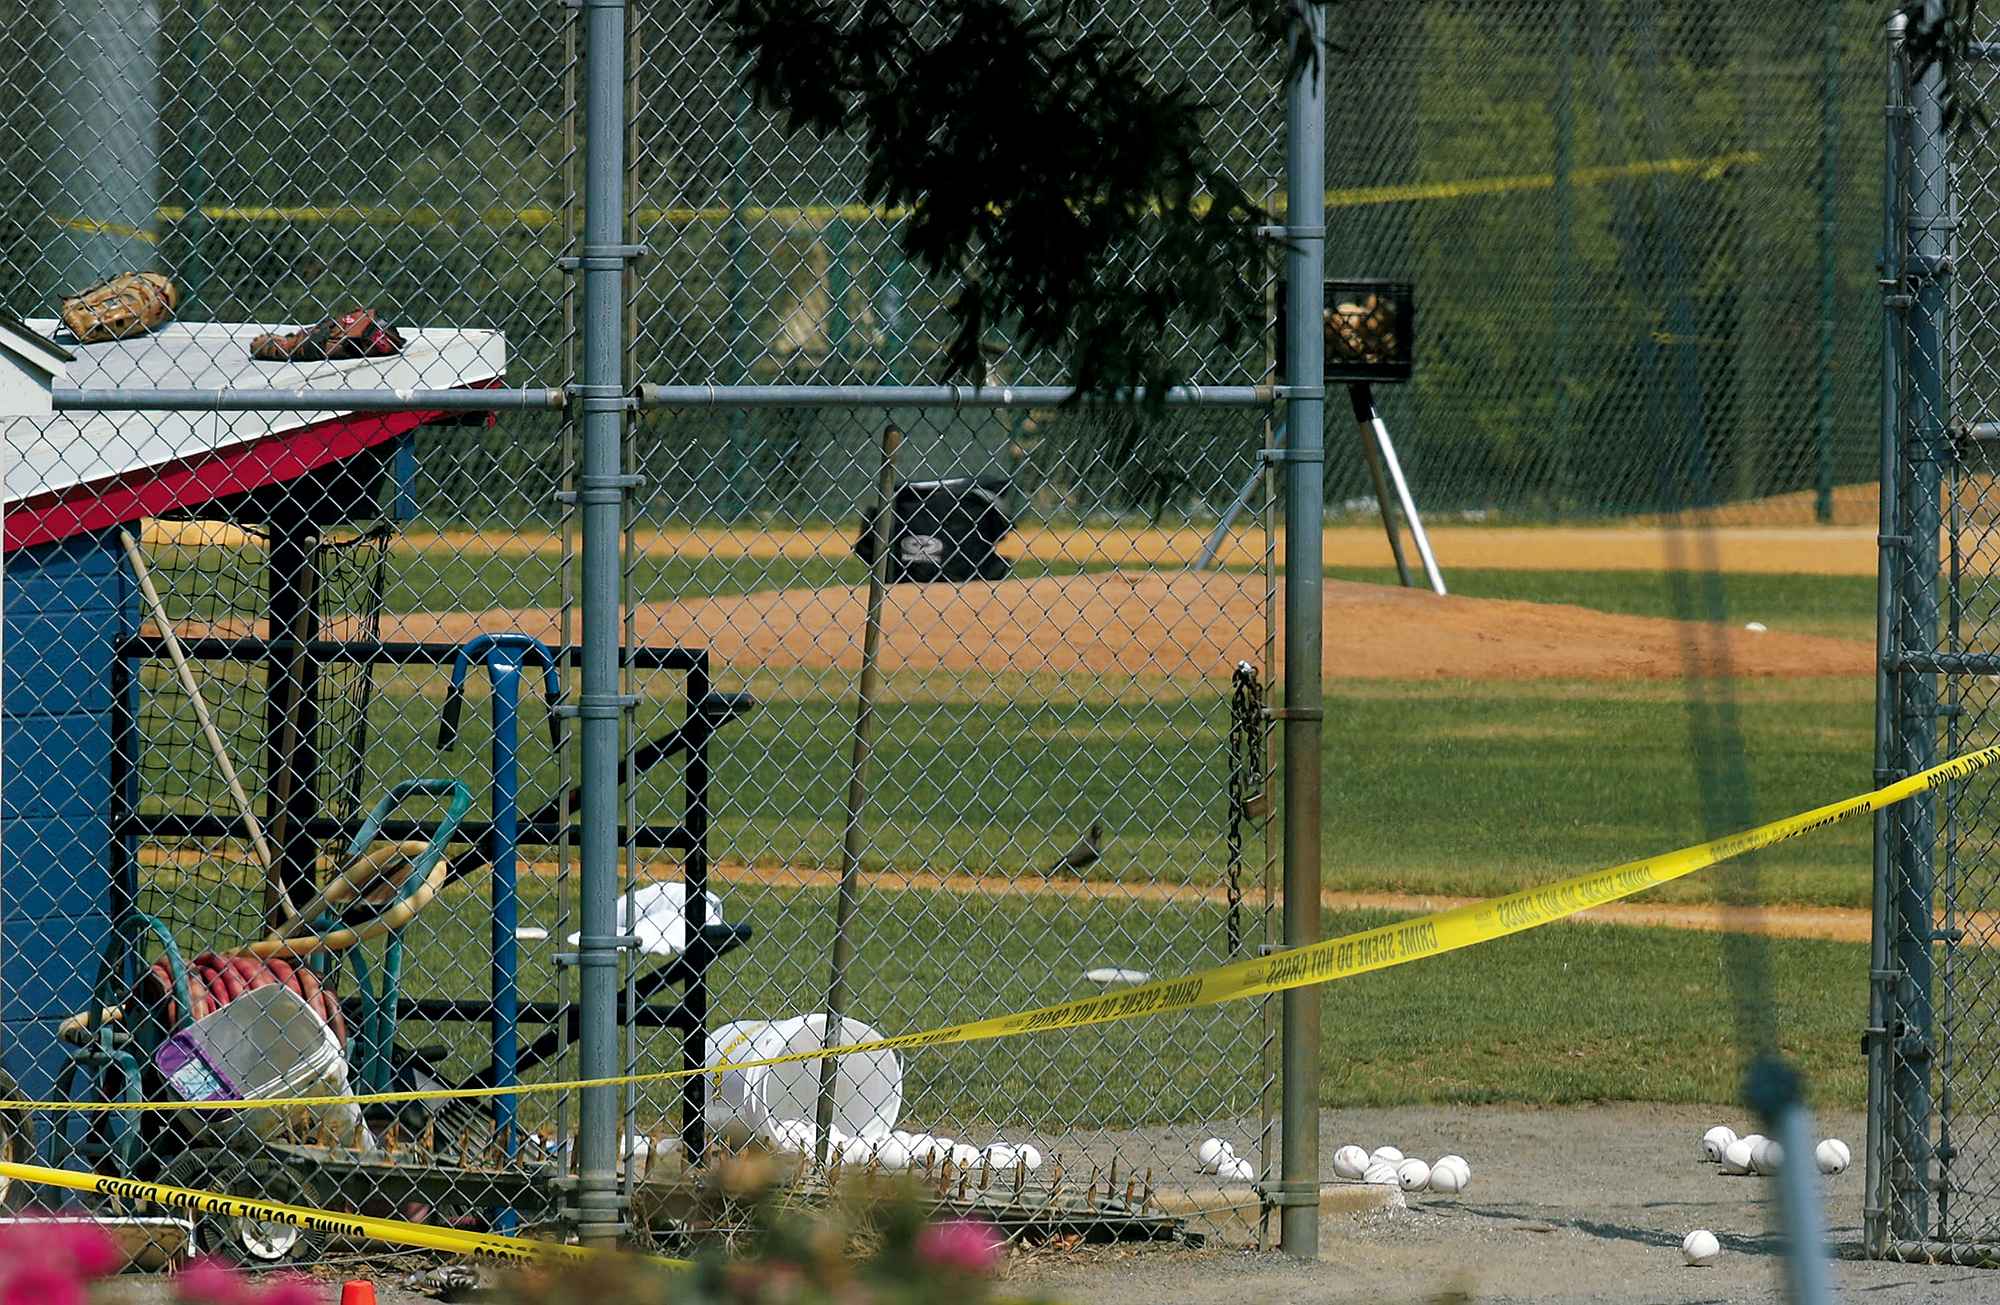 The Terrifying Story of the Congressional Baseball Shooting